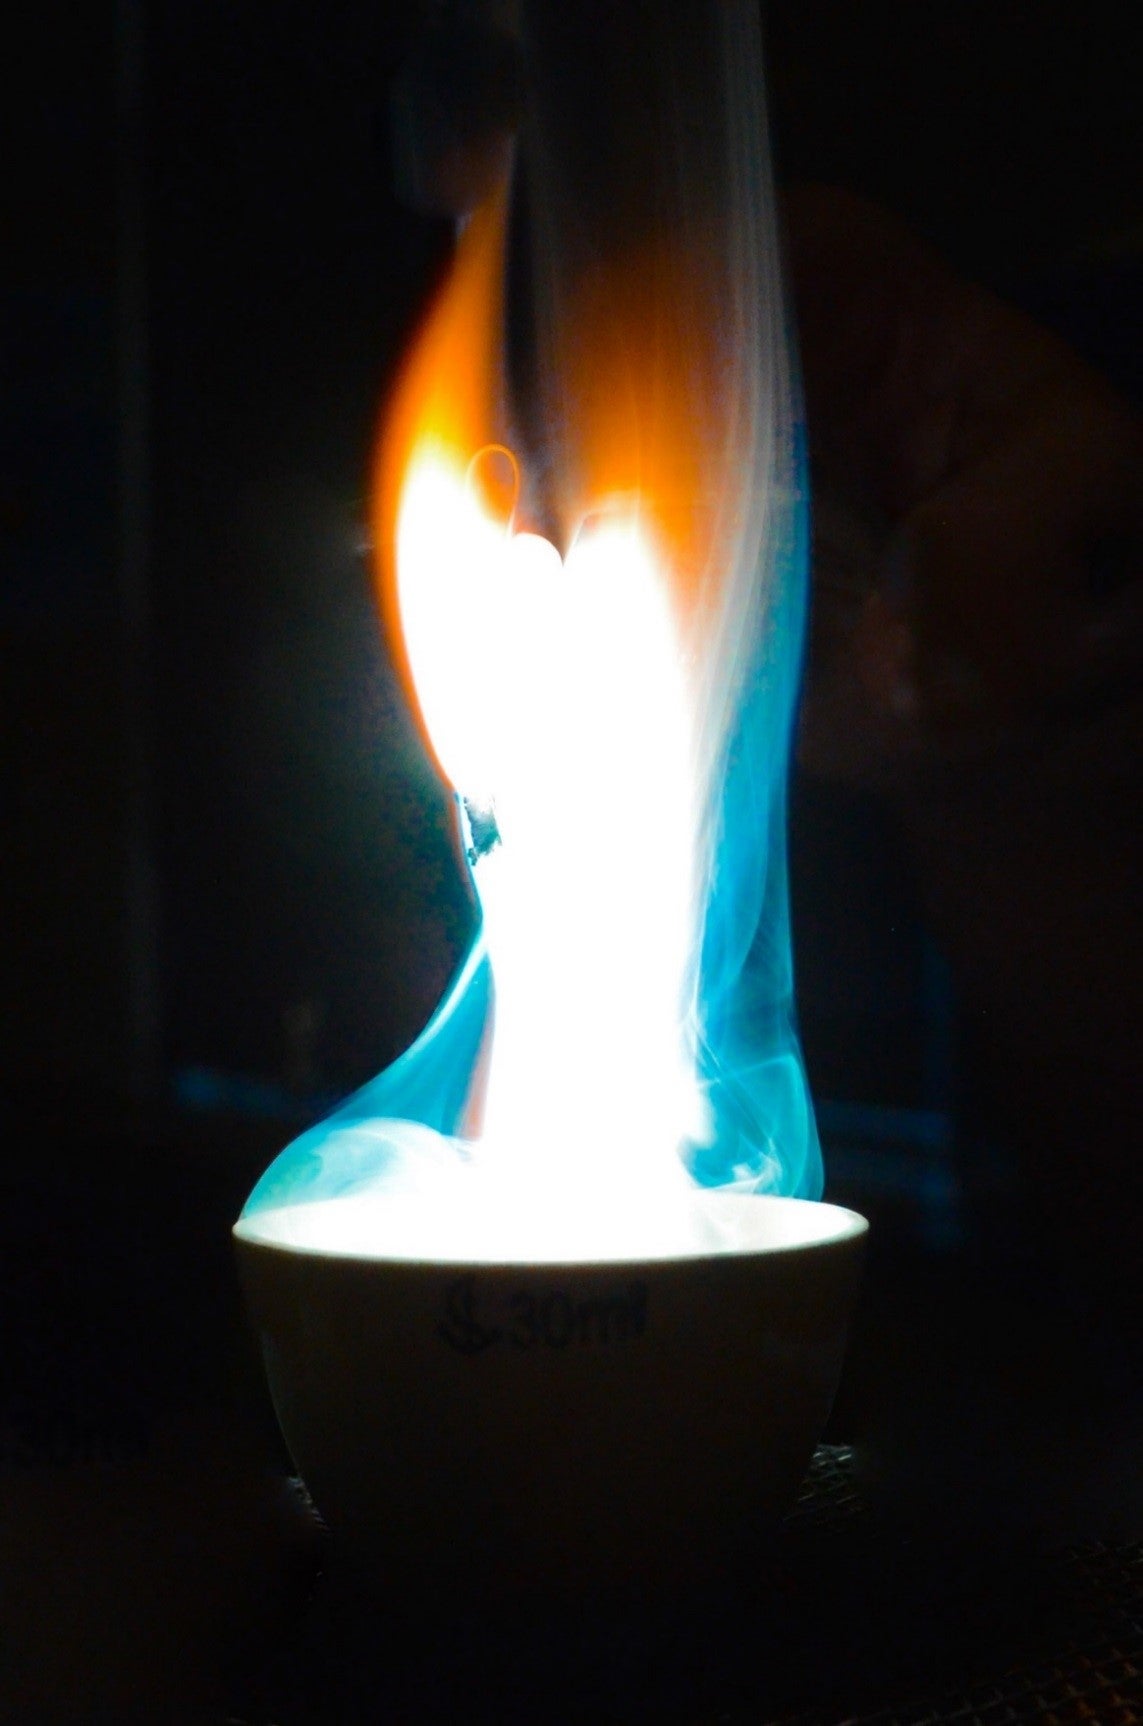 Blue, orange and white flames in a bowl.